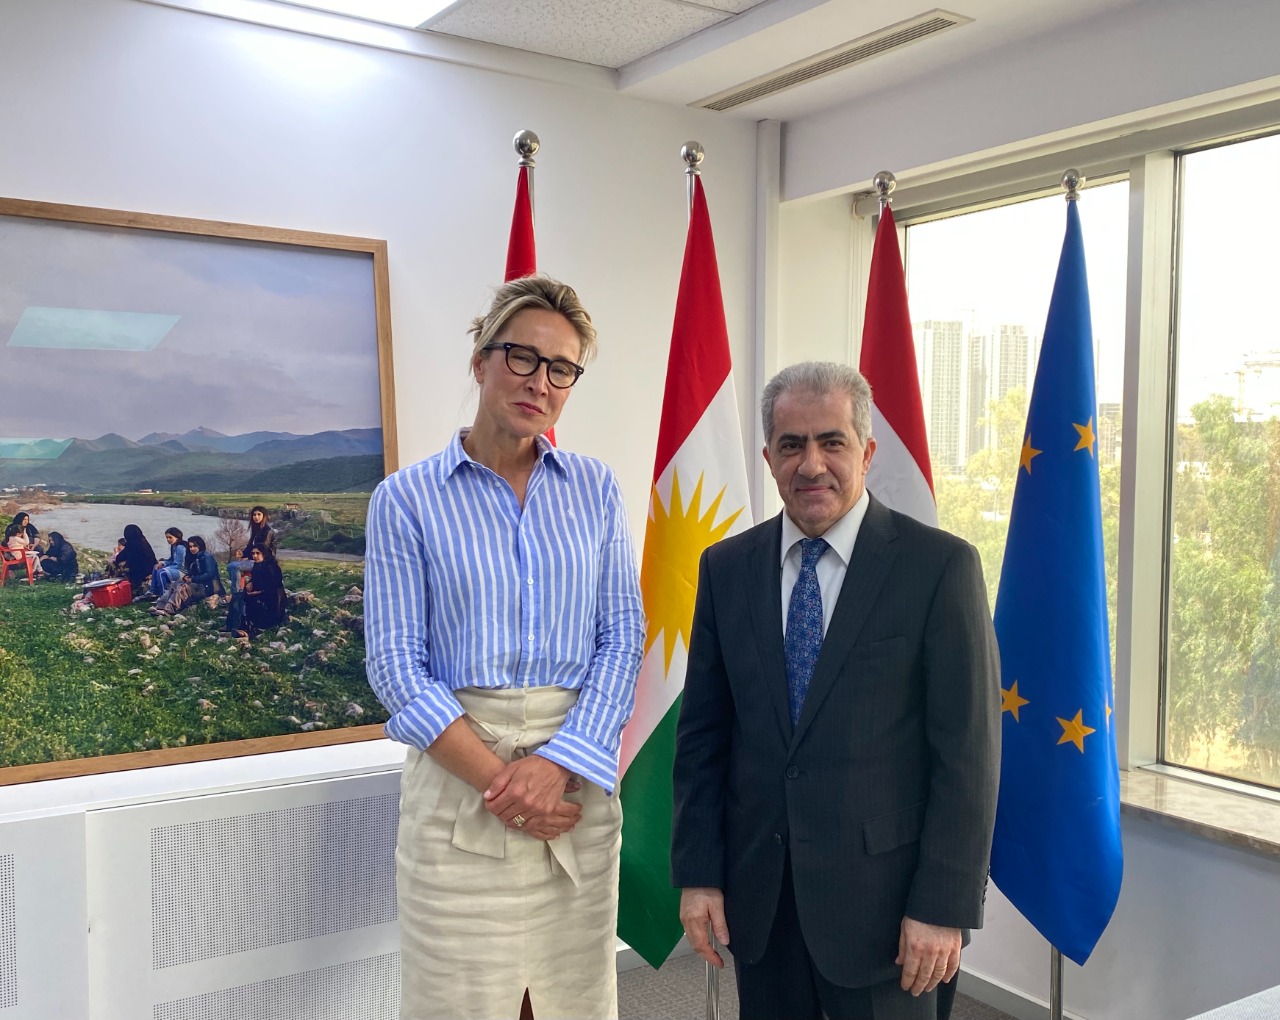 KBBC President, Mr Ashty Aladin meets with Deputy Consul General of the Netherlands Erbil.